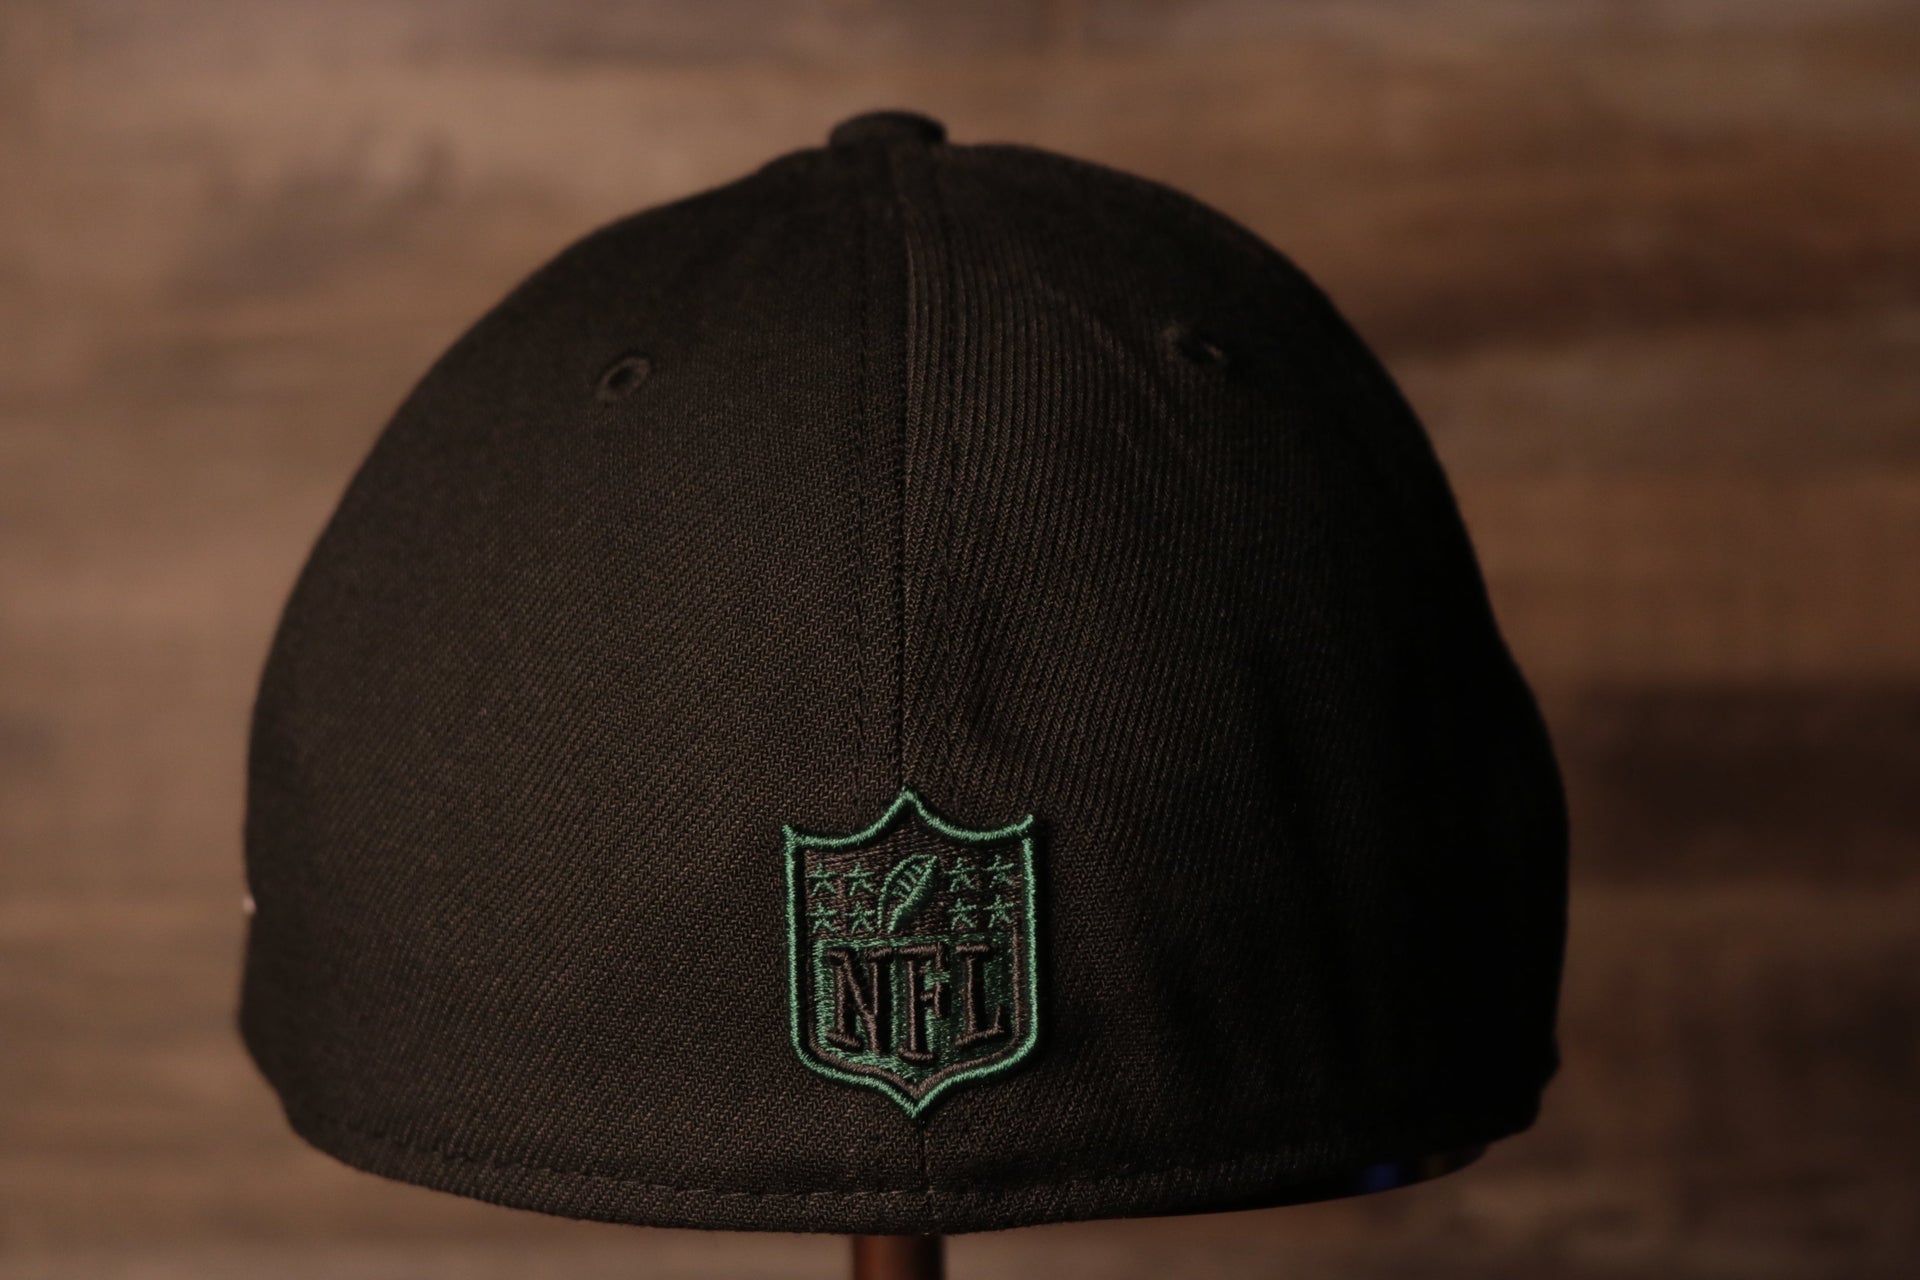 The nfl shield is on the back of this cap Jets 2020 NFL Draft Flexfit | New York Jets 2020 NFL Draft Black Stretch Fit